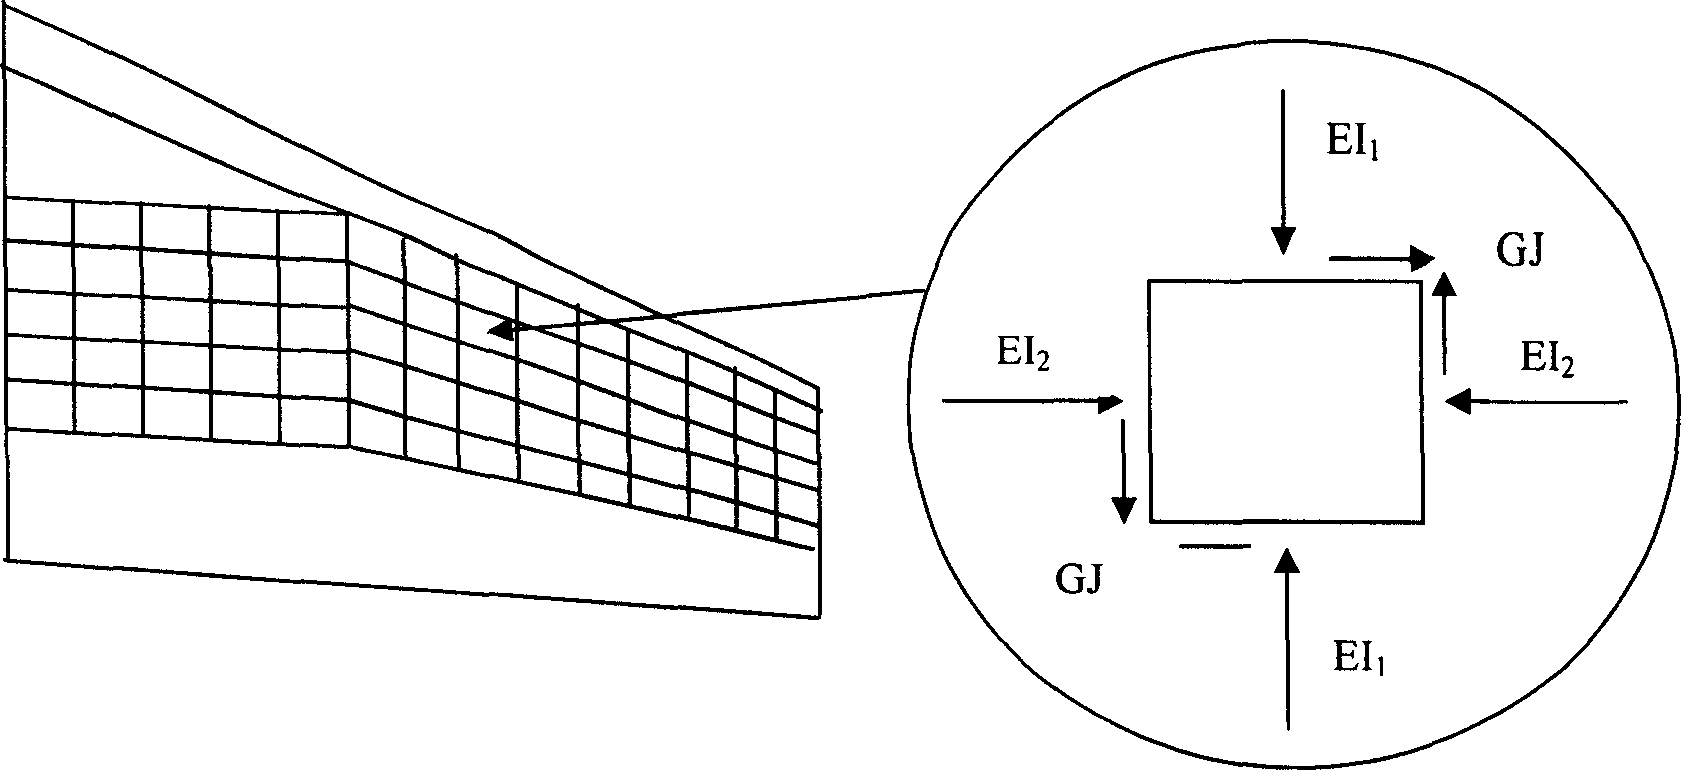 Layer spreading design calculating method of composite material according to rigidity requirement